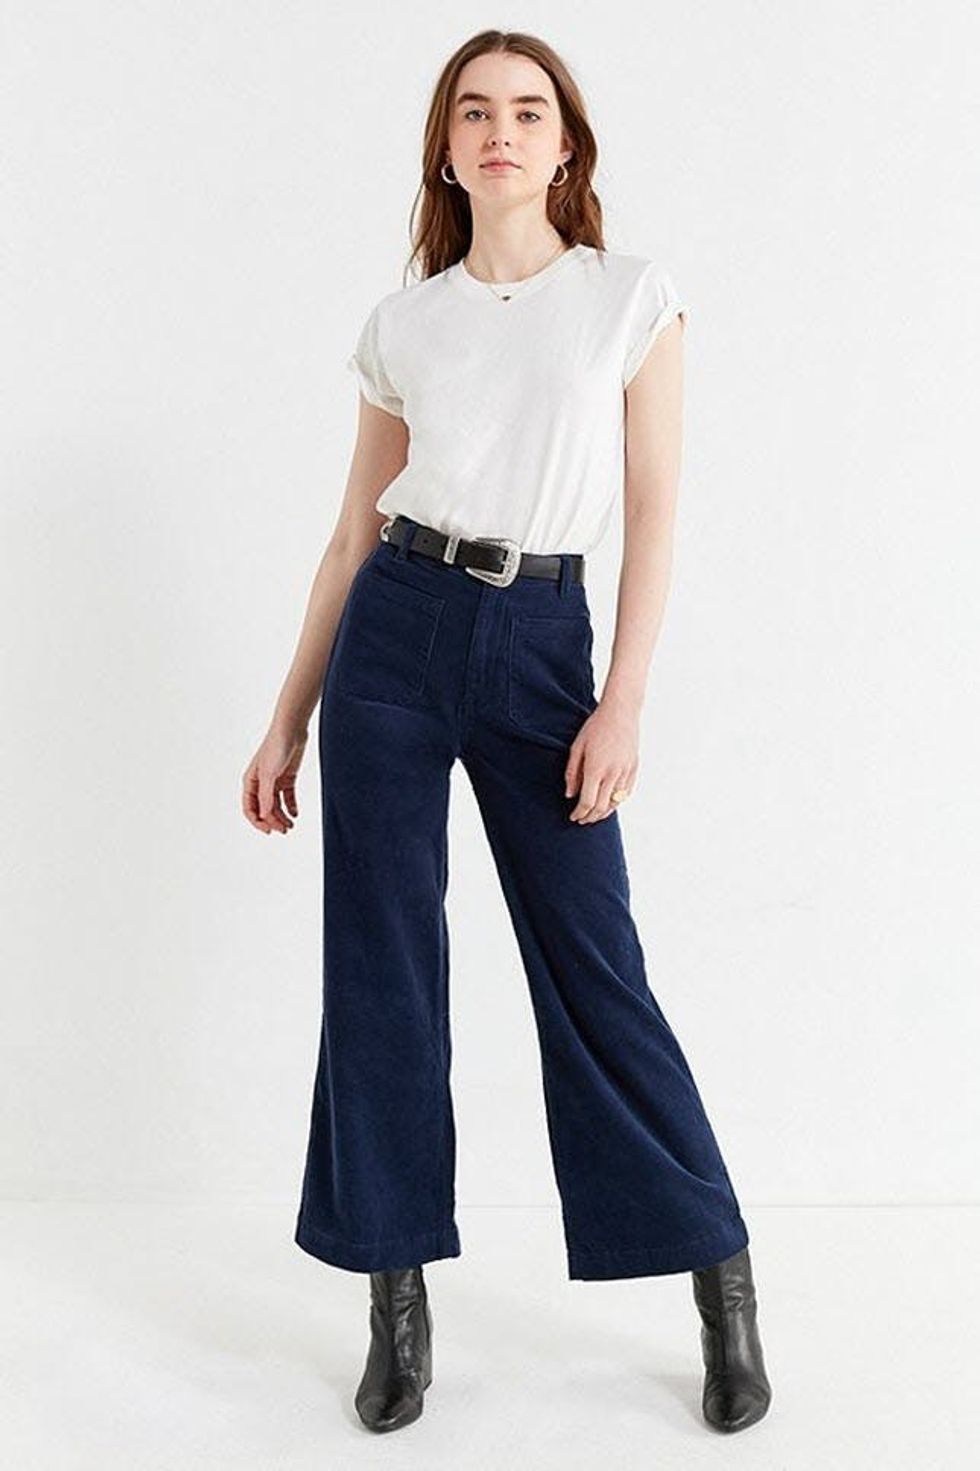 12 Ways to Try the Wide-Leg Pant Trend - Brit + Co